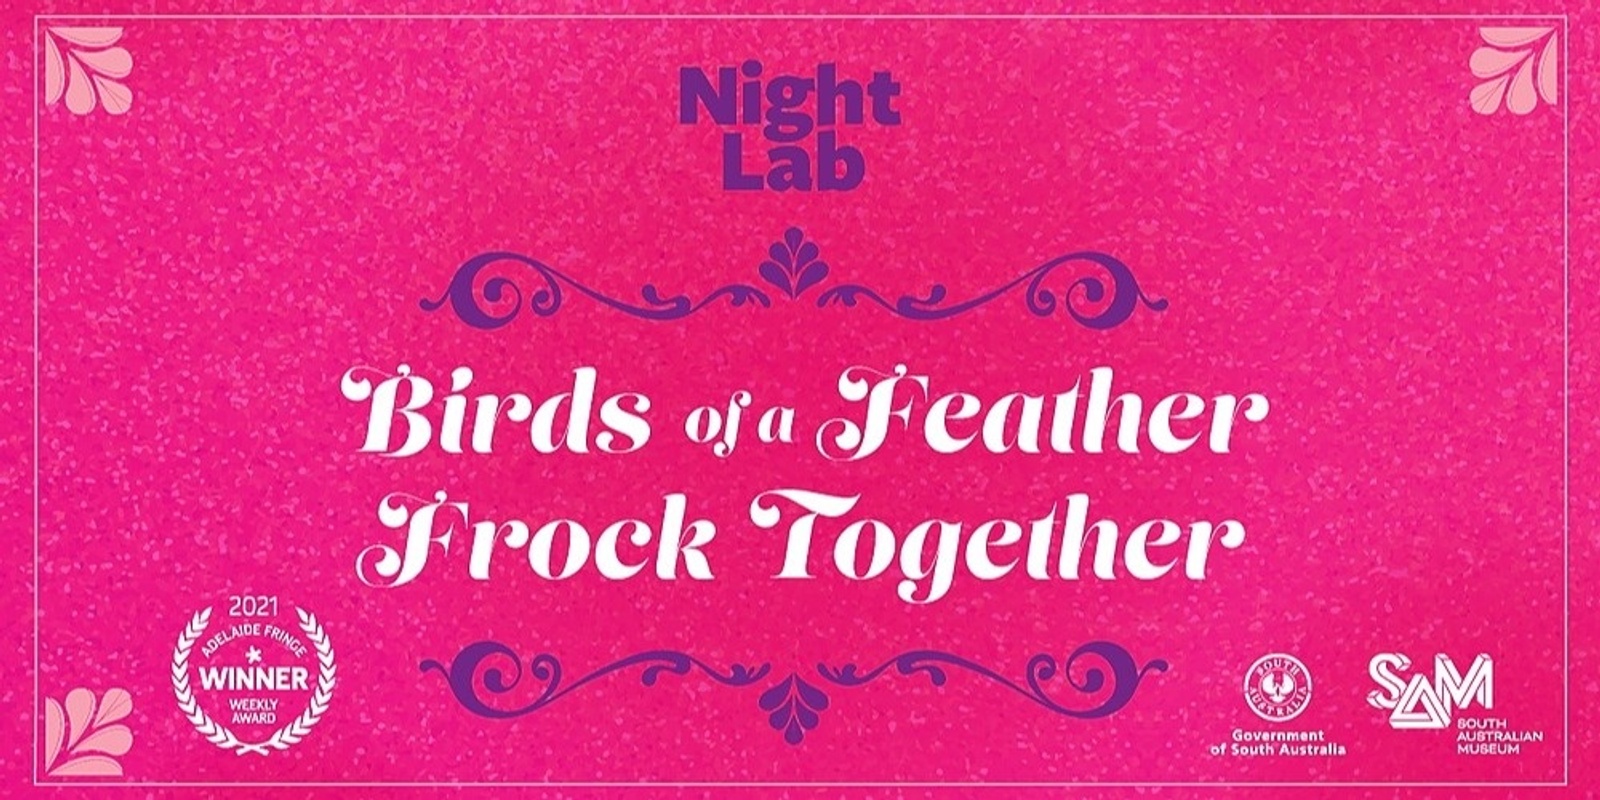 Banner image for Night Lab: Birds of a feather (frock together!)